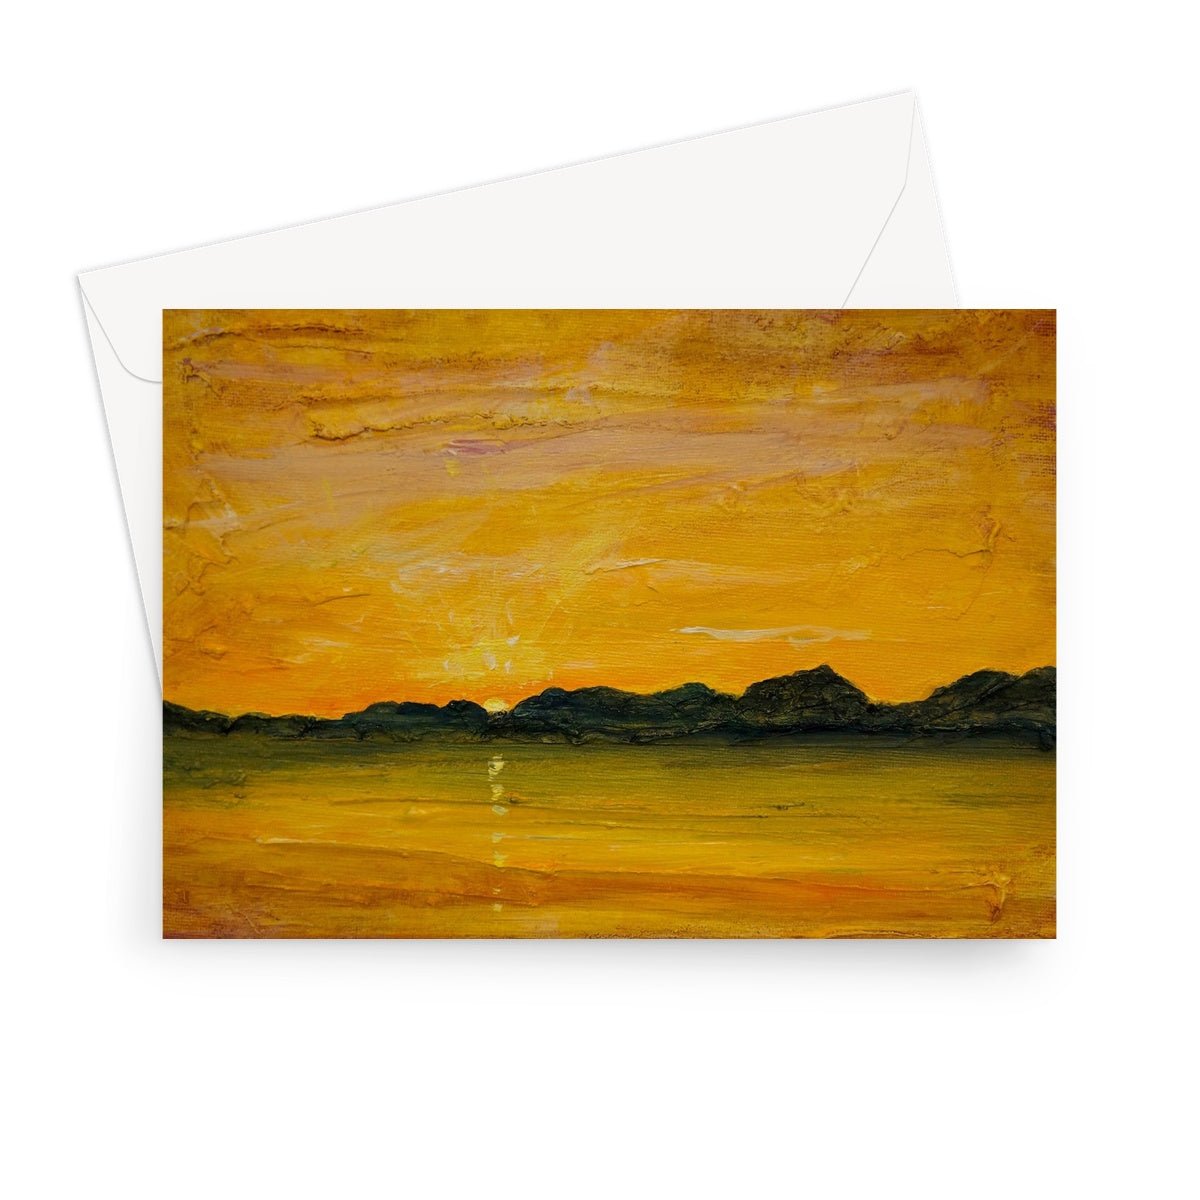 Jura Sunset Art Gifts Greeting Card-Greetings Cards-Hebridean Islands Art Gallery-7"x5"-1 Card-Paintings, Prints, Homeware, Art Gifts From Scotland By Scottish Artist Kevin Hunter